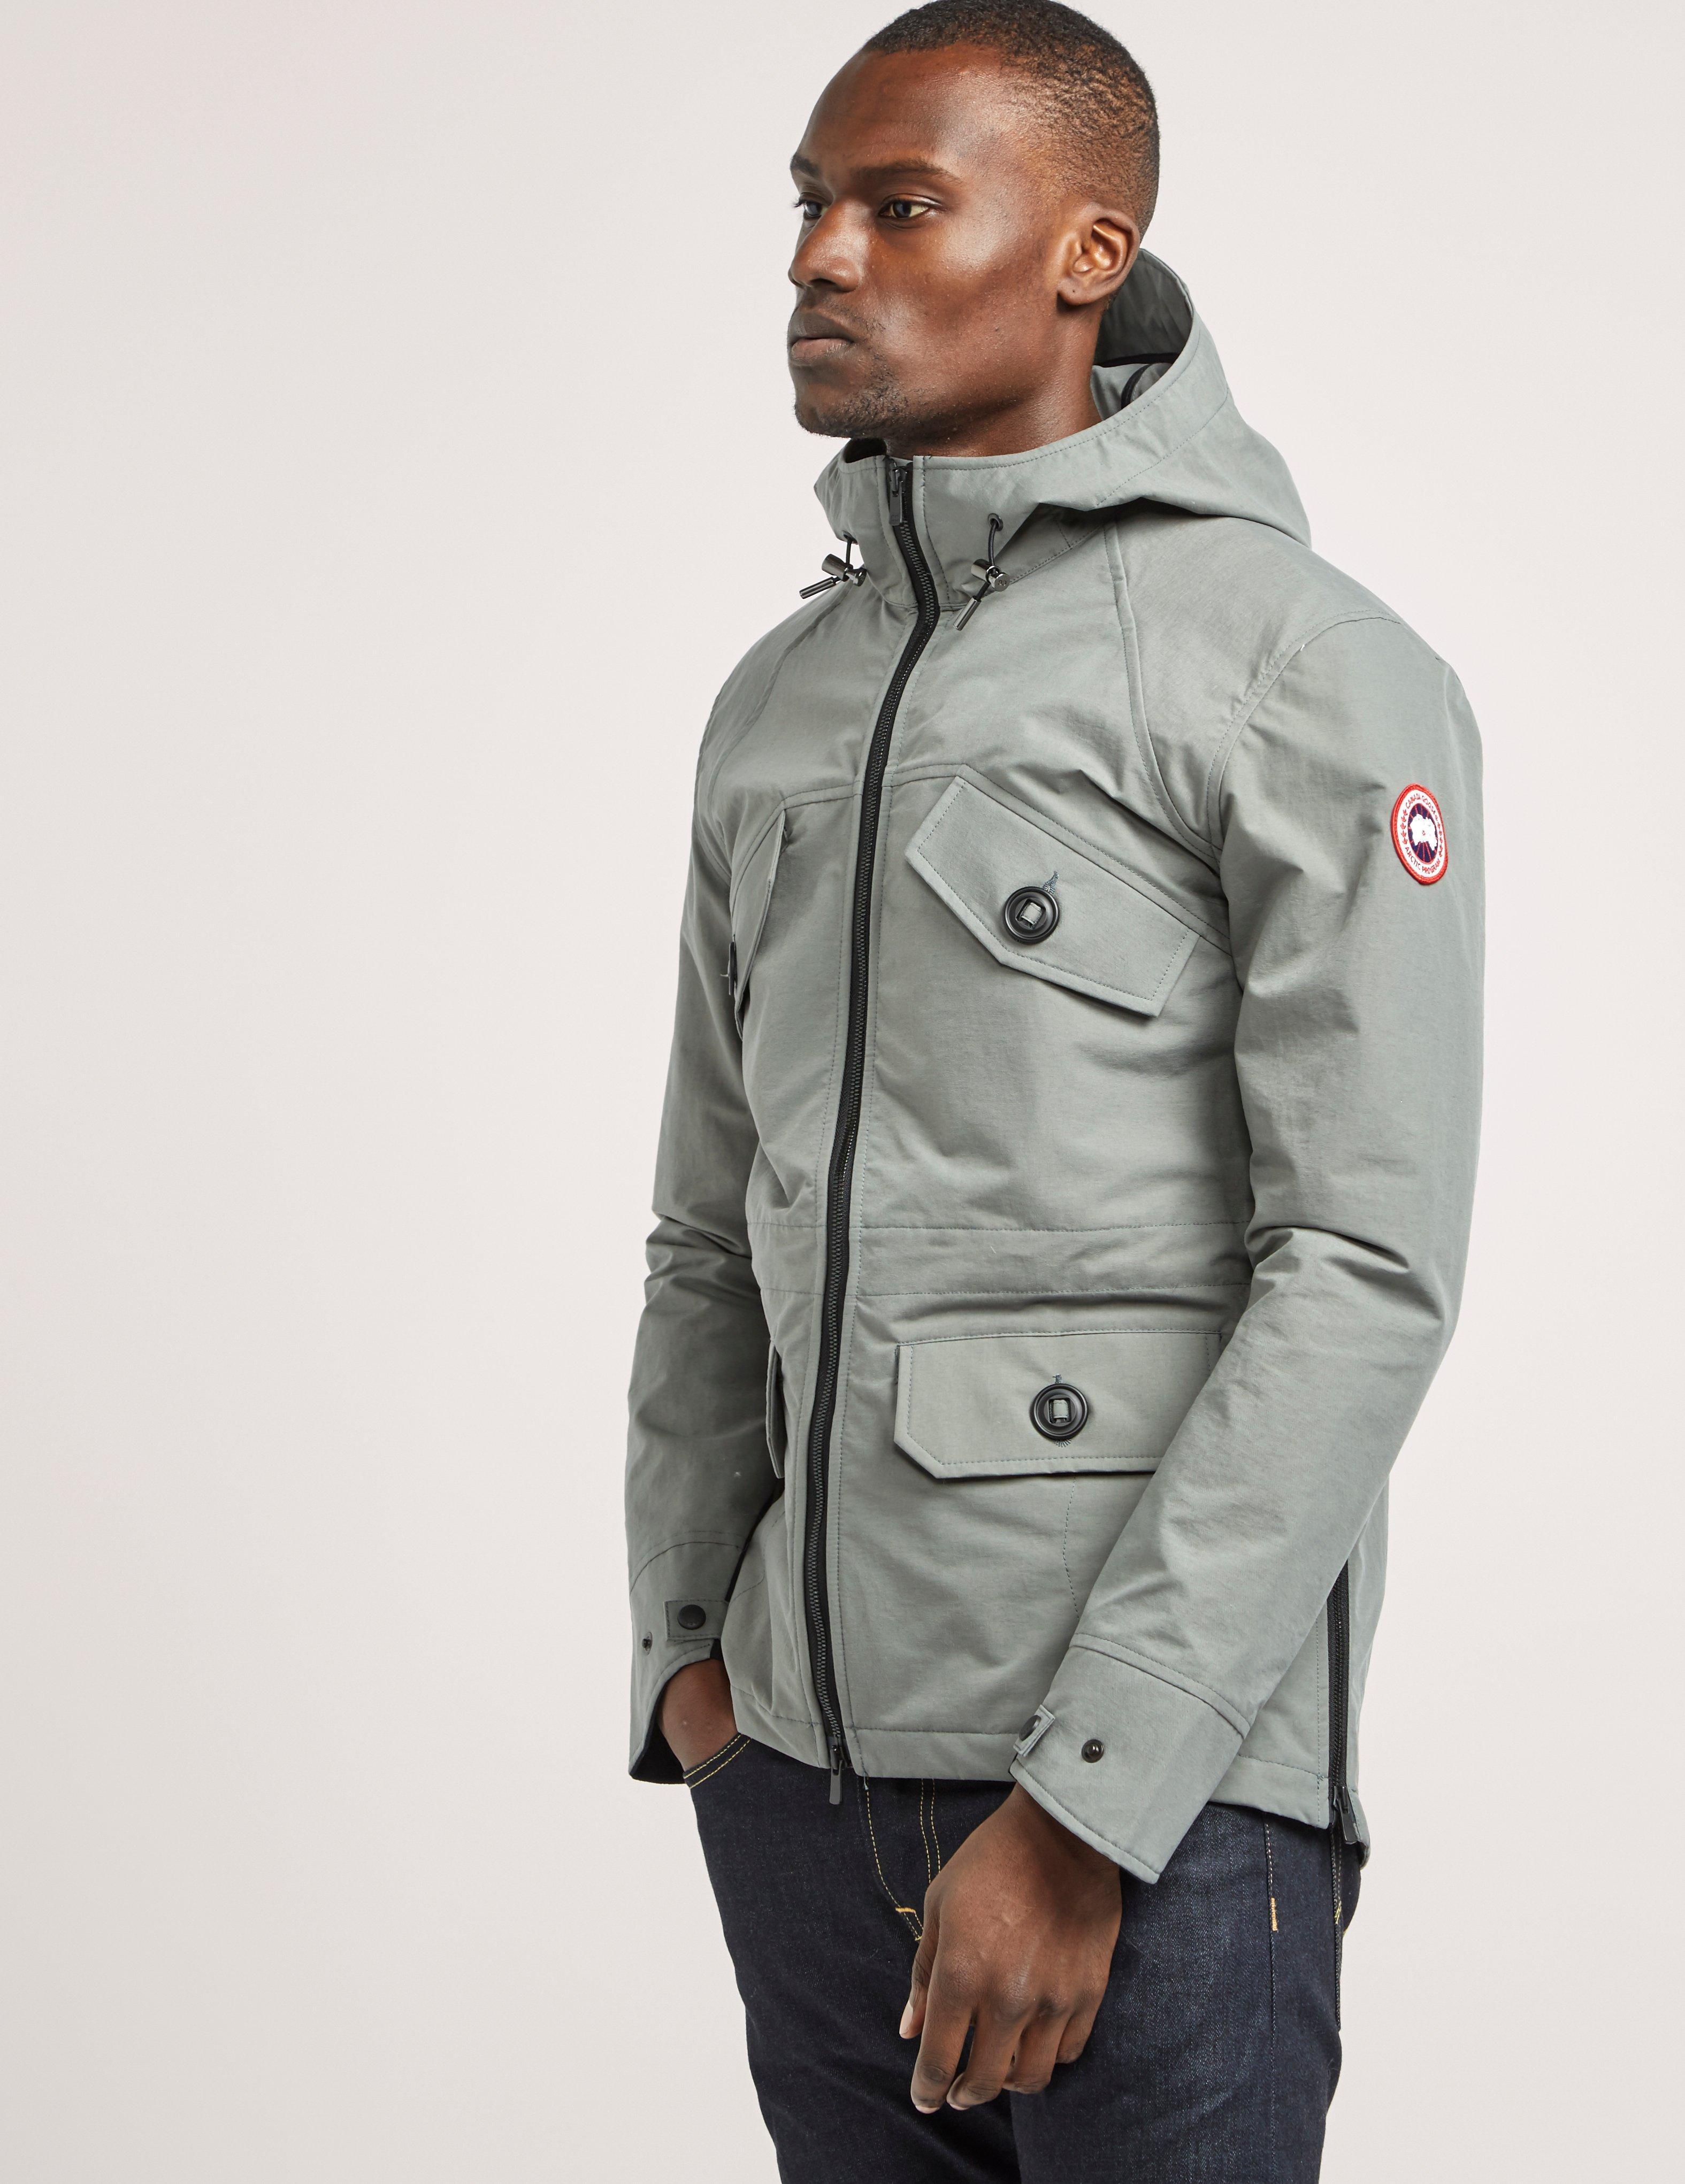 Lyst - Canada Goose Redstone Jacket in Gray for Men